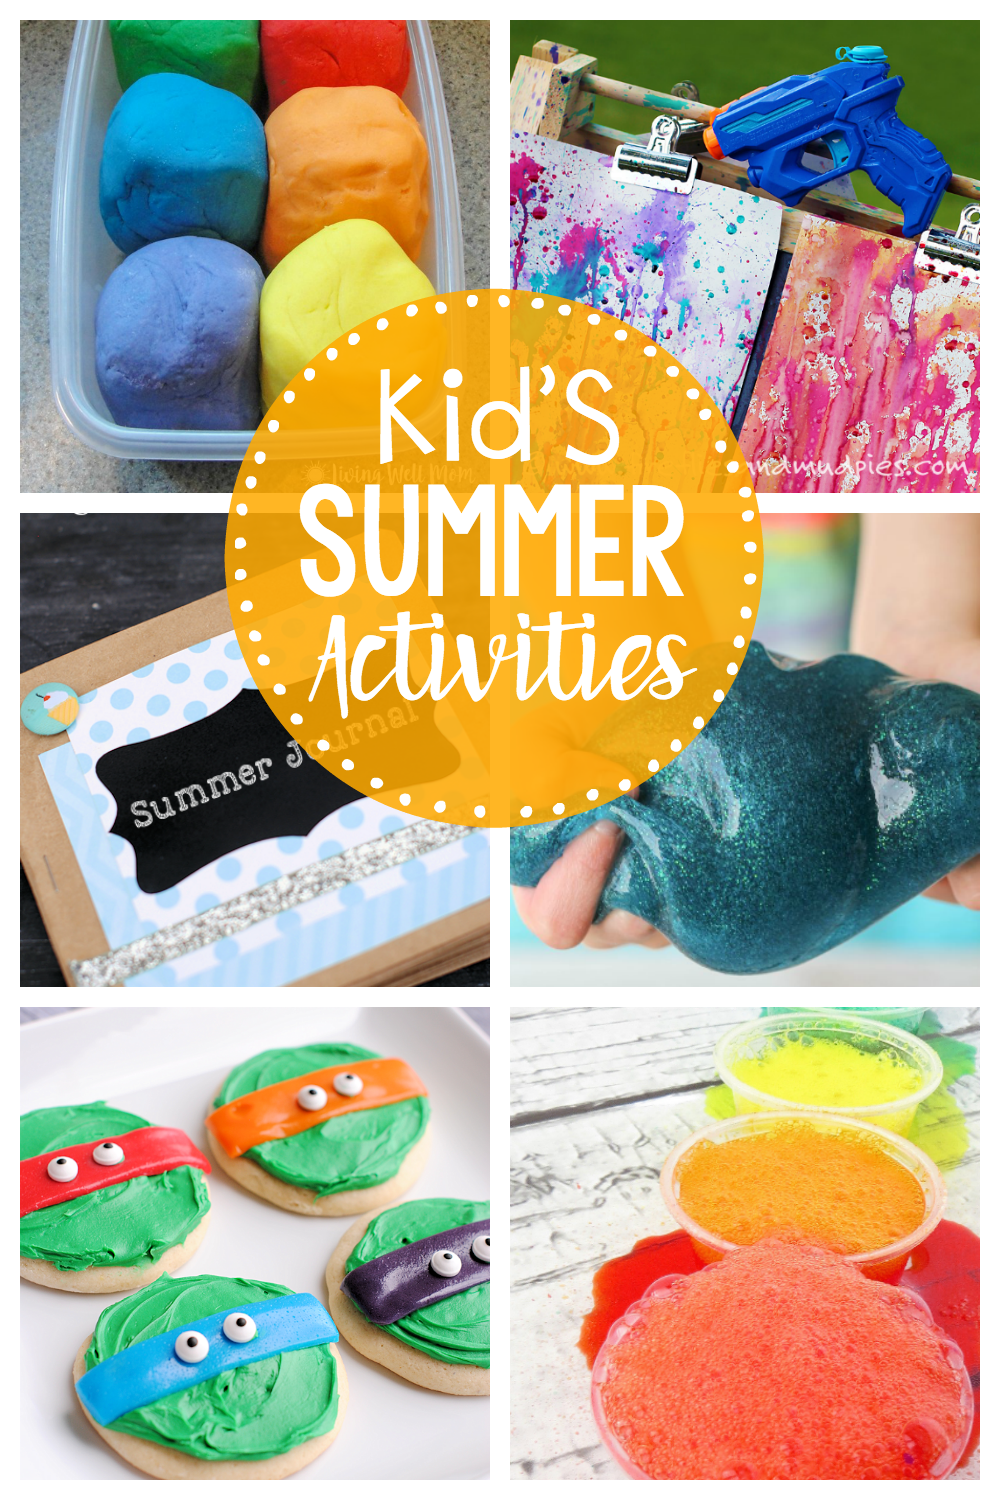 Kid's Summer Activities-These are some fun ideas and activities to keep the kids happy this summer. A great summer bucket list with crafts, games and treats. #summer #summerfun #summeractivities #kids